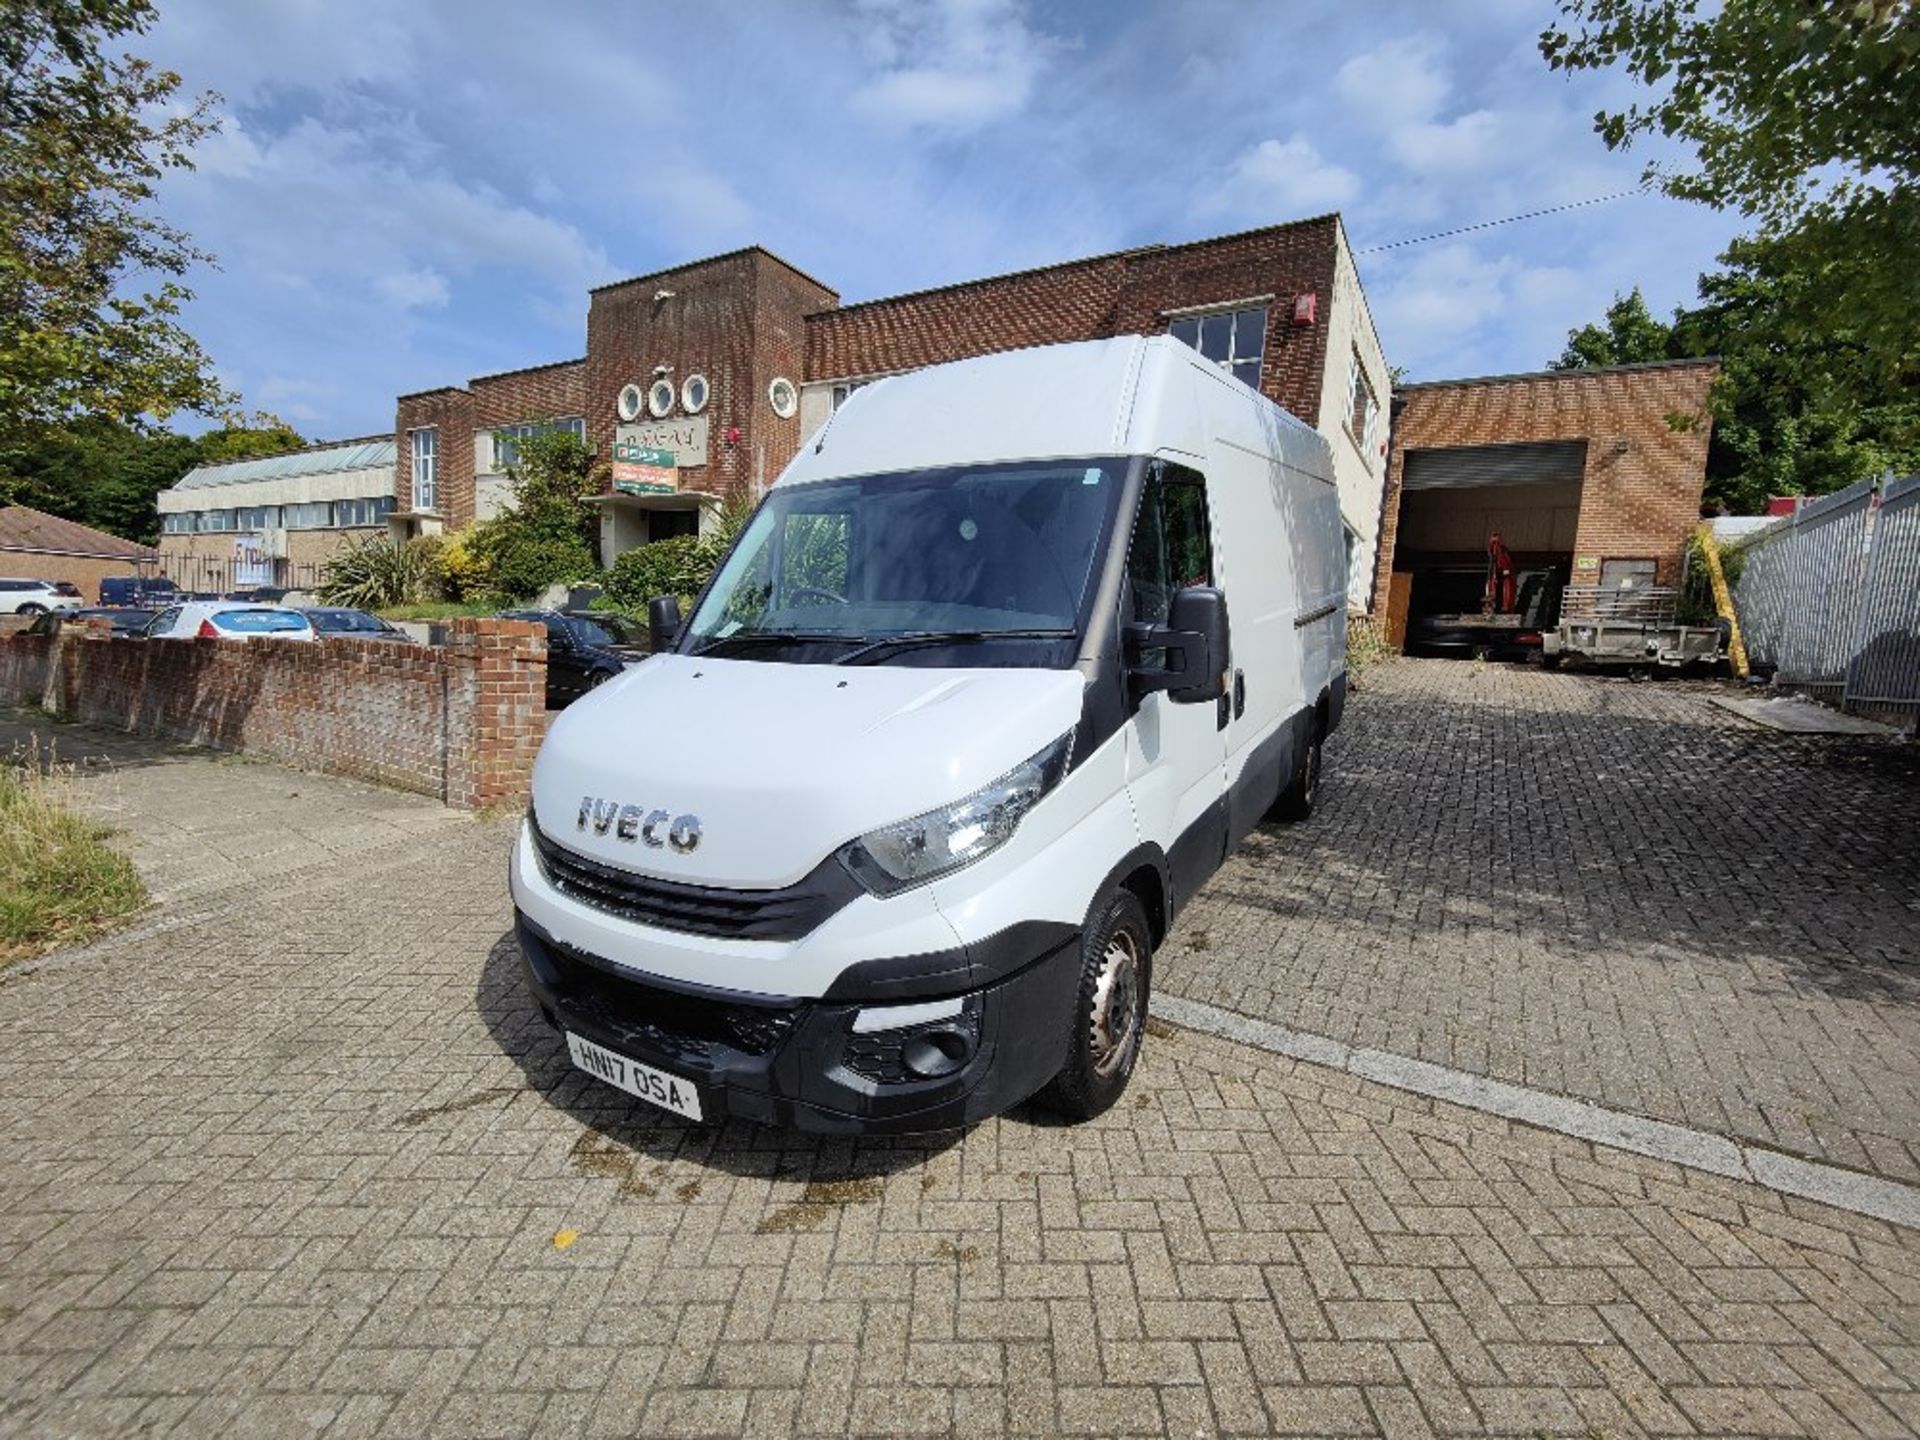 Iveco Daily 3520 WB 2.3D 35S14 High Roof Van - Image 15 of 23